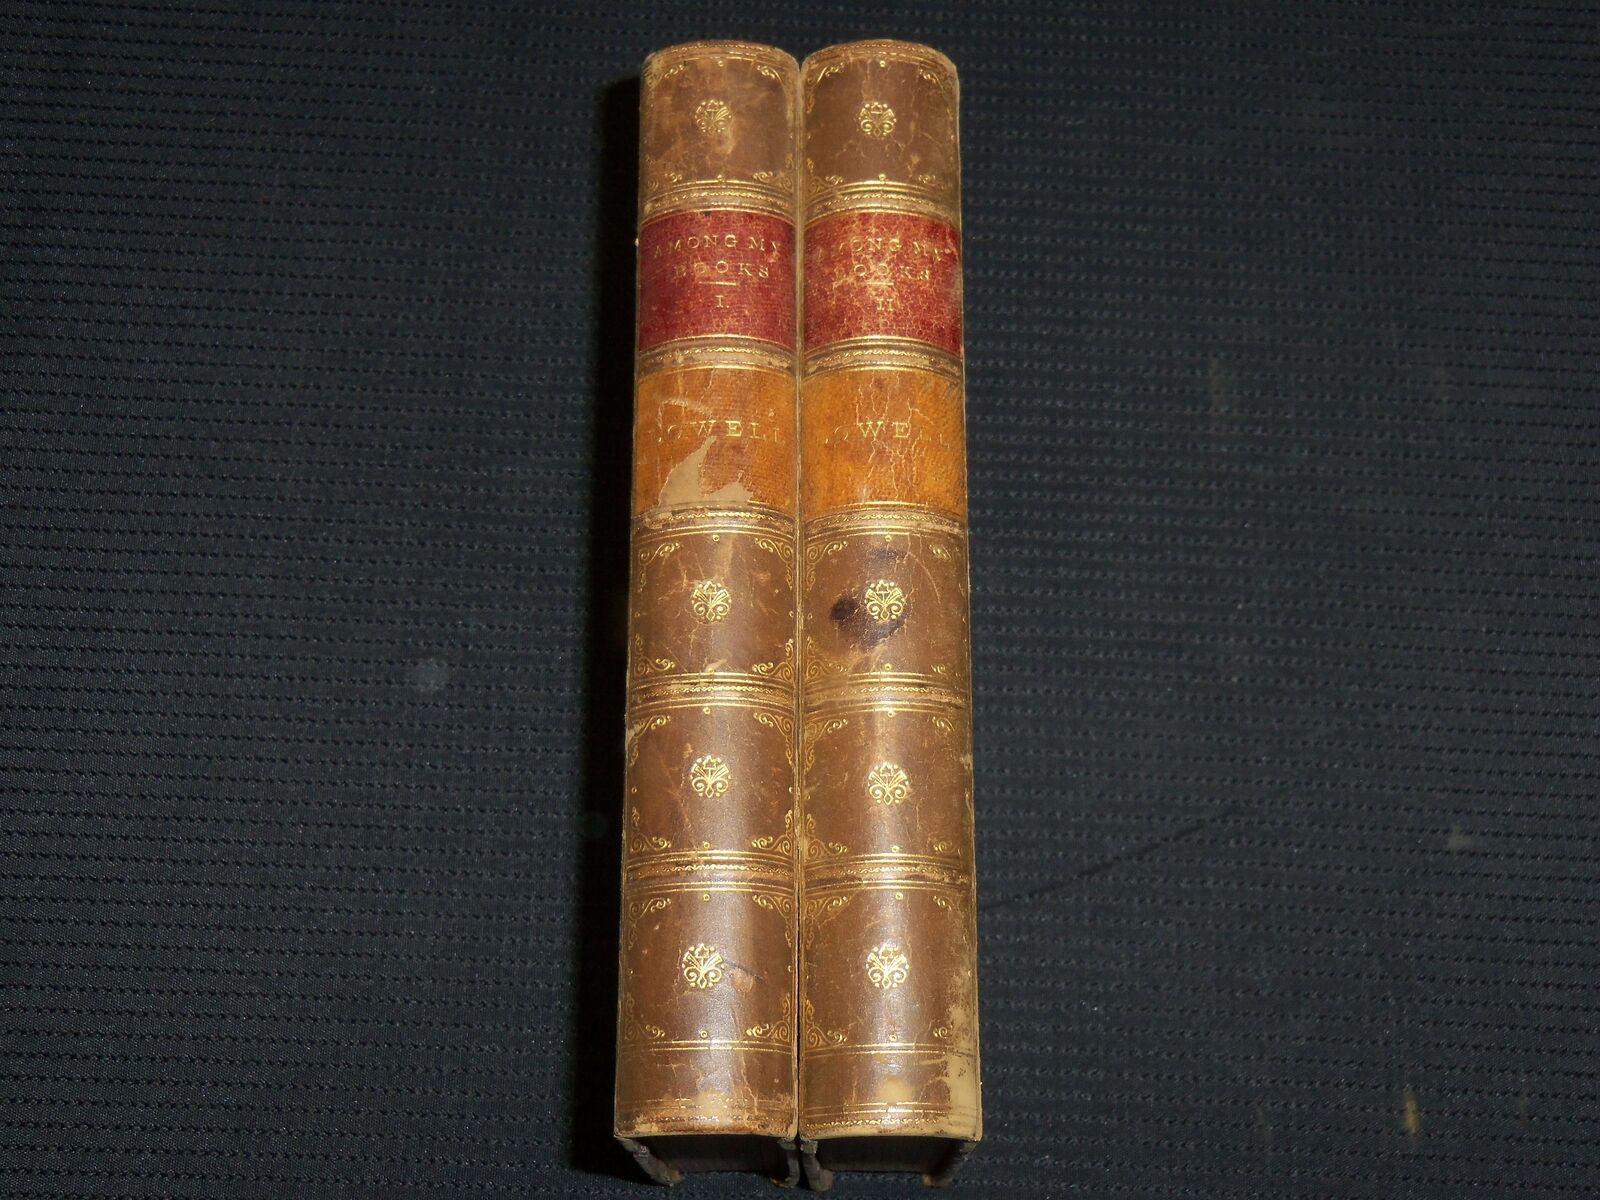 1883 AMONG MY BOOKS BY JAMES RUSSELL LOWELL VOLUME 1 & 2 - KD 3409P